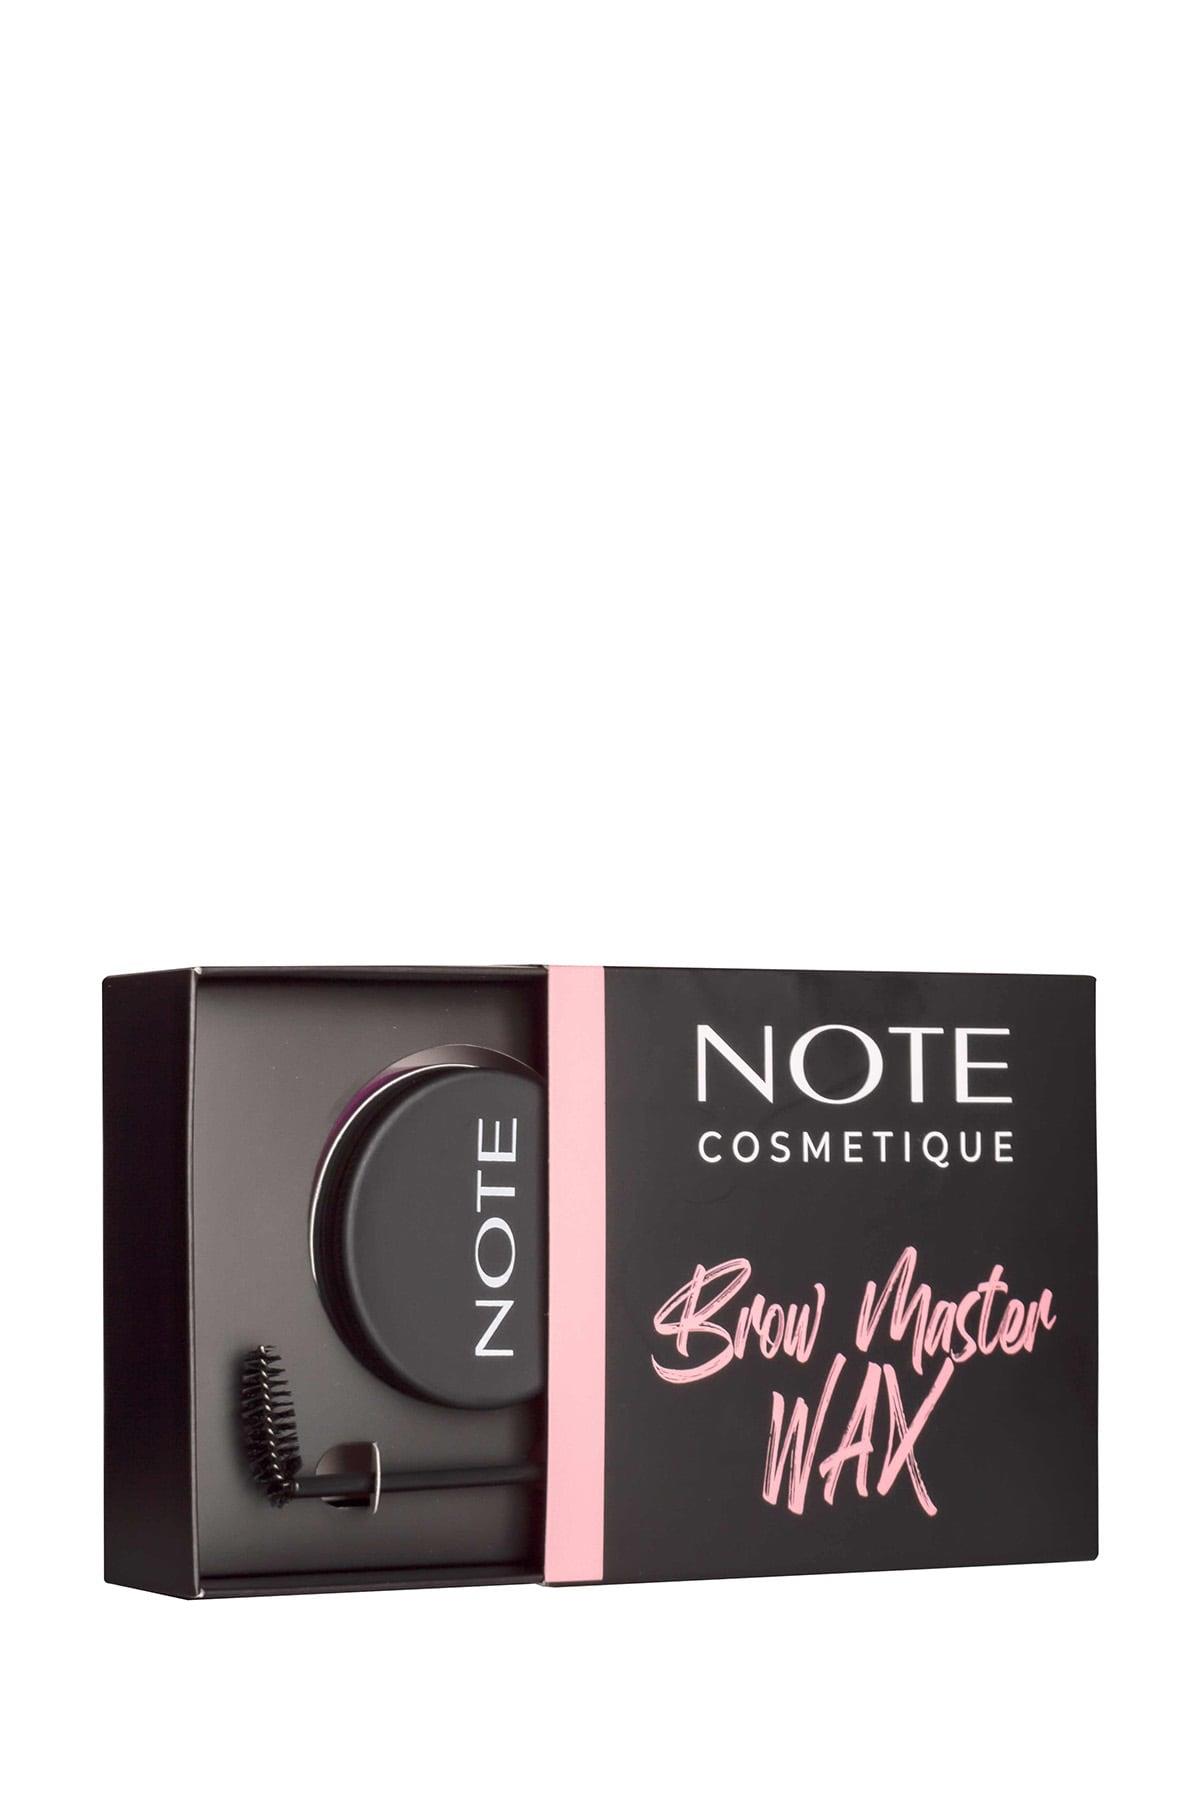 NOTE BROW MASTER WAX | Note Cosmetique